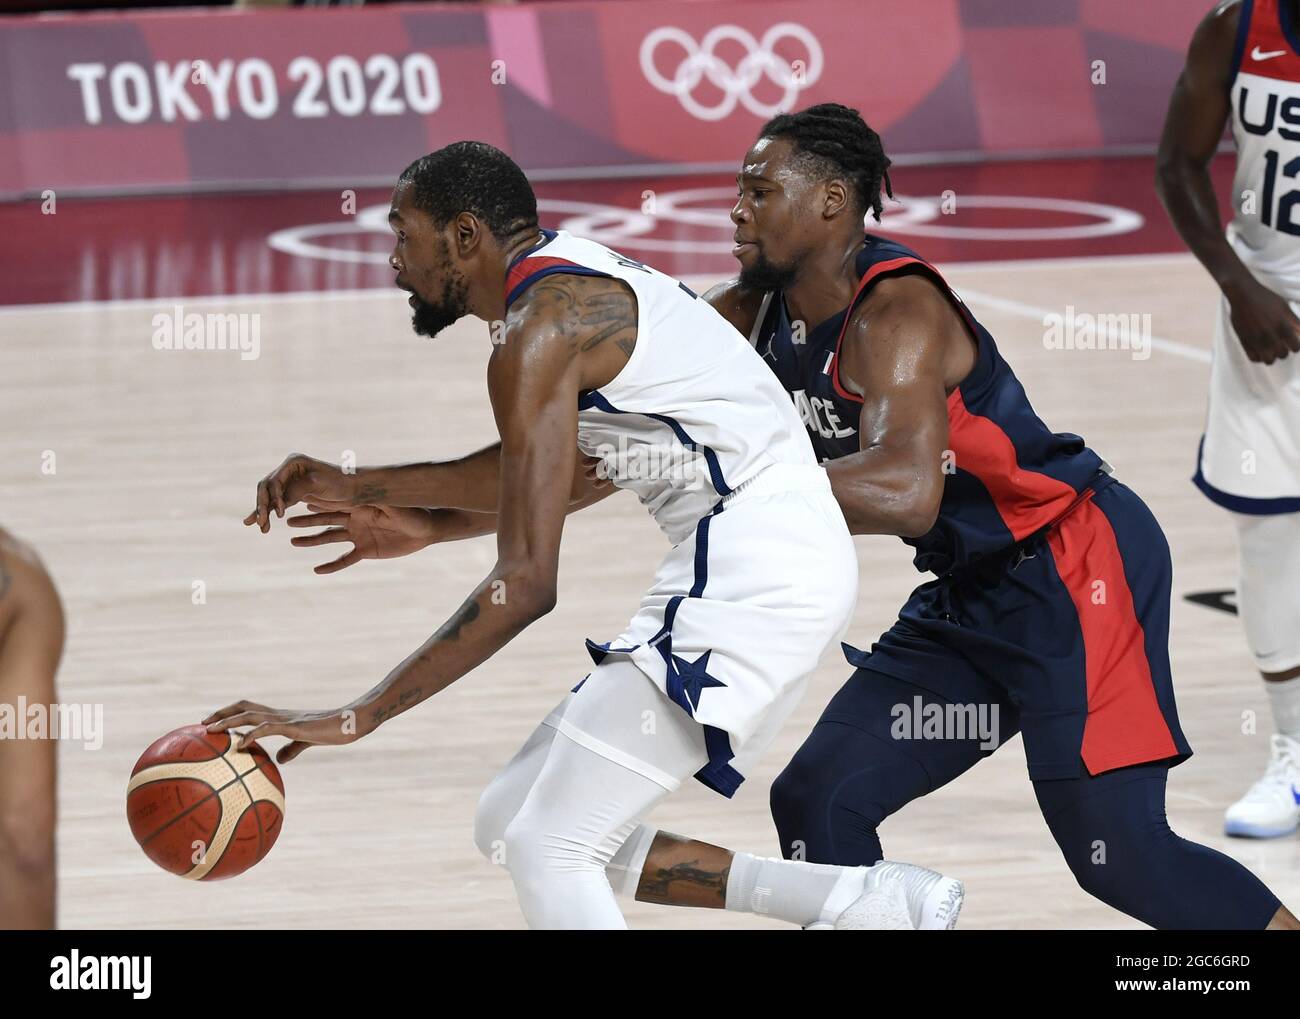 Tokyo, Japan. 07th Aug, 2021. United States' Kevin Durant (L) drives to basket as he is pursued by France's Guerschon Yabusele (R) in Men's Basketball final at the Tokyo 2020 Olympics, Saturday, August 7, 2021, in Tokyo, Japan. USA defeated France, winning the Gold Medal, 87-82. Photo by Mike Theiler/UPI Credit: UPI/Alamy Live News Stock Photo